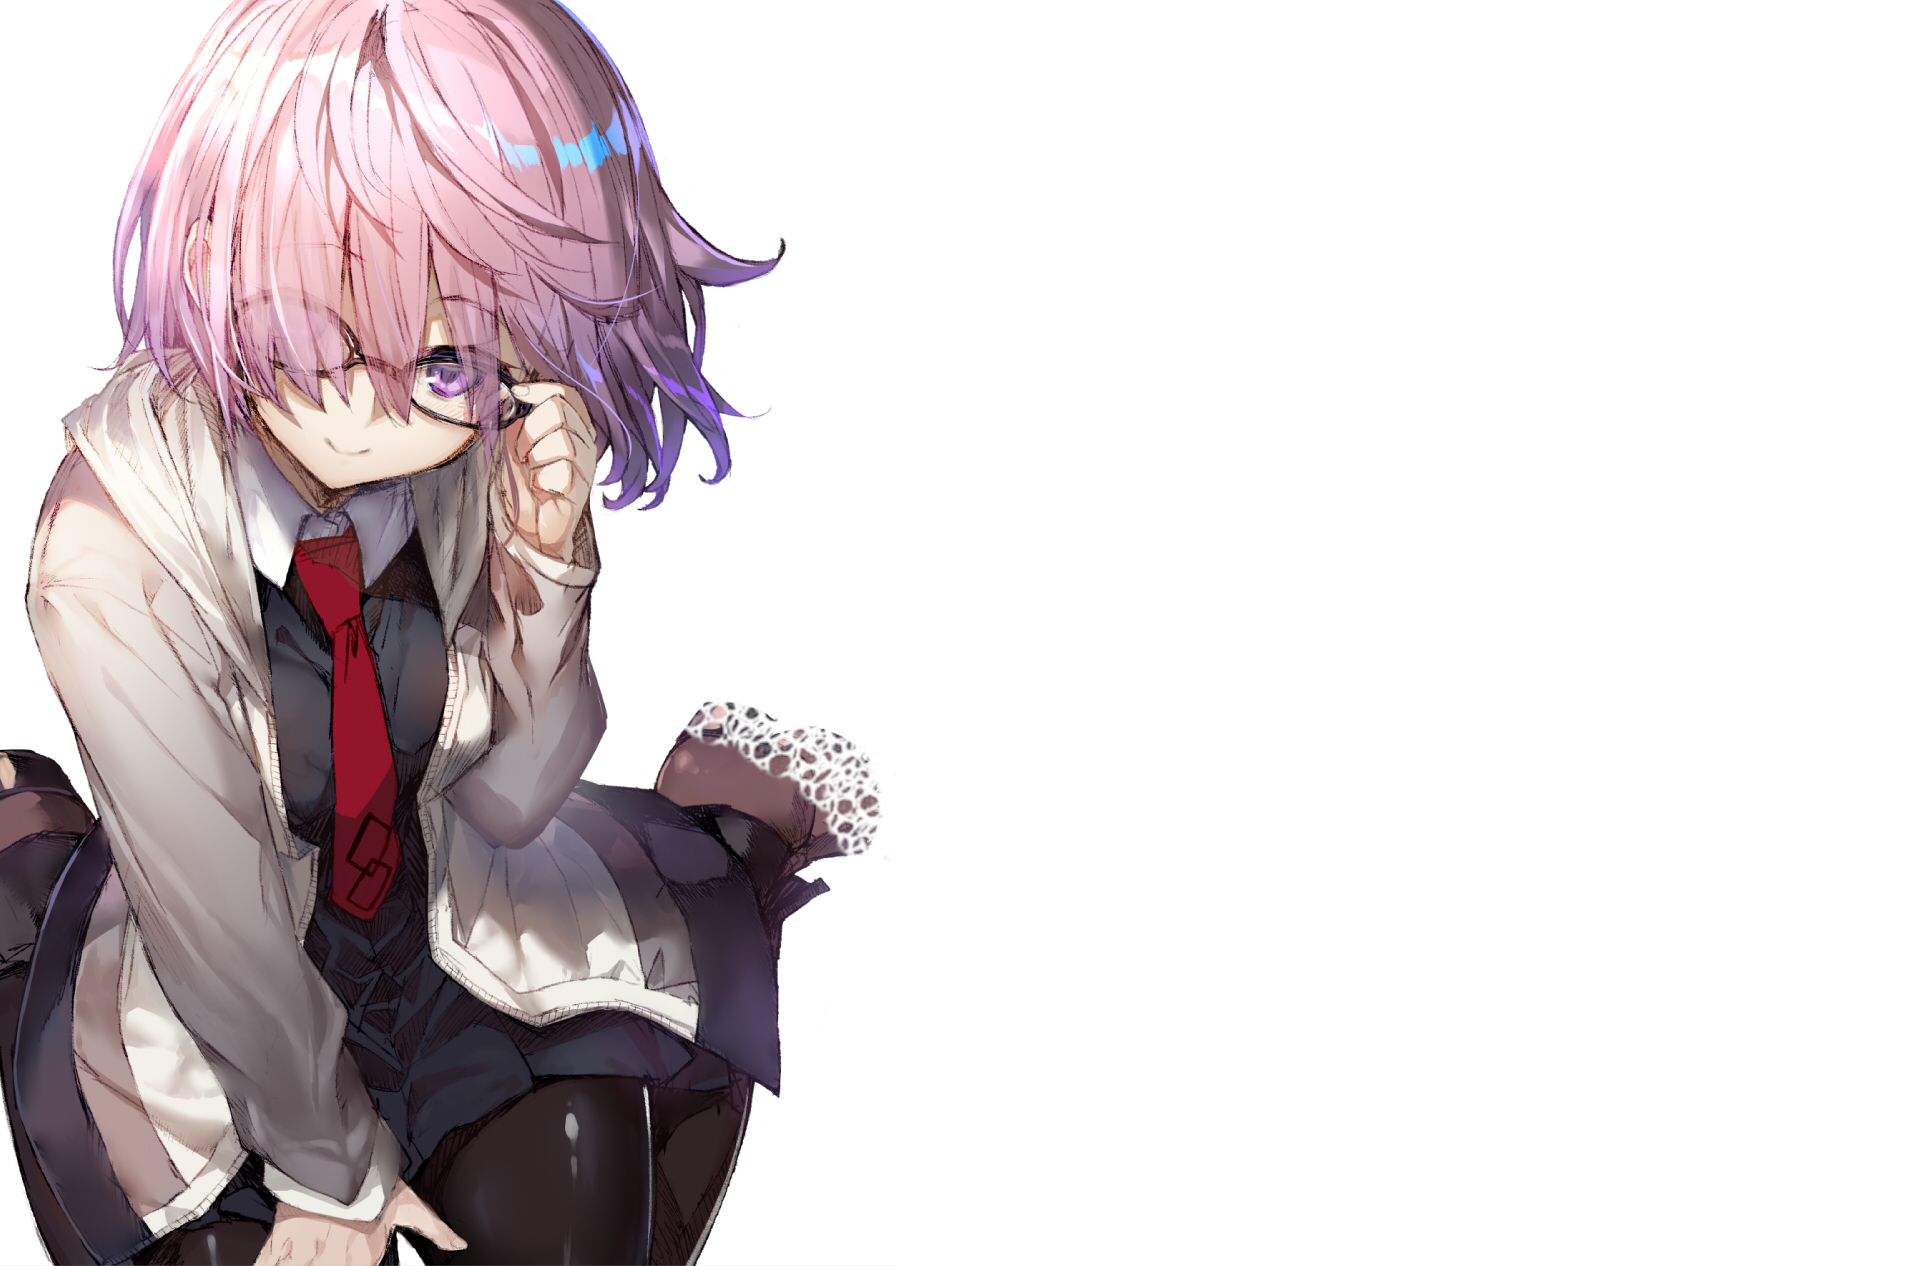 Download Mashu Kyrielight Anime Fategrand Order Hd Wallpaper By しらび 3953